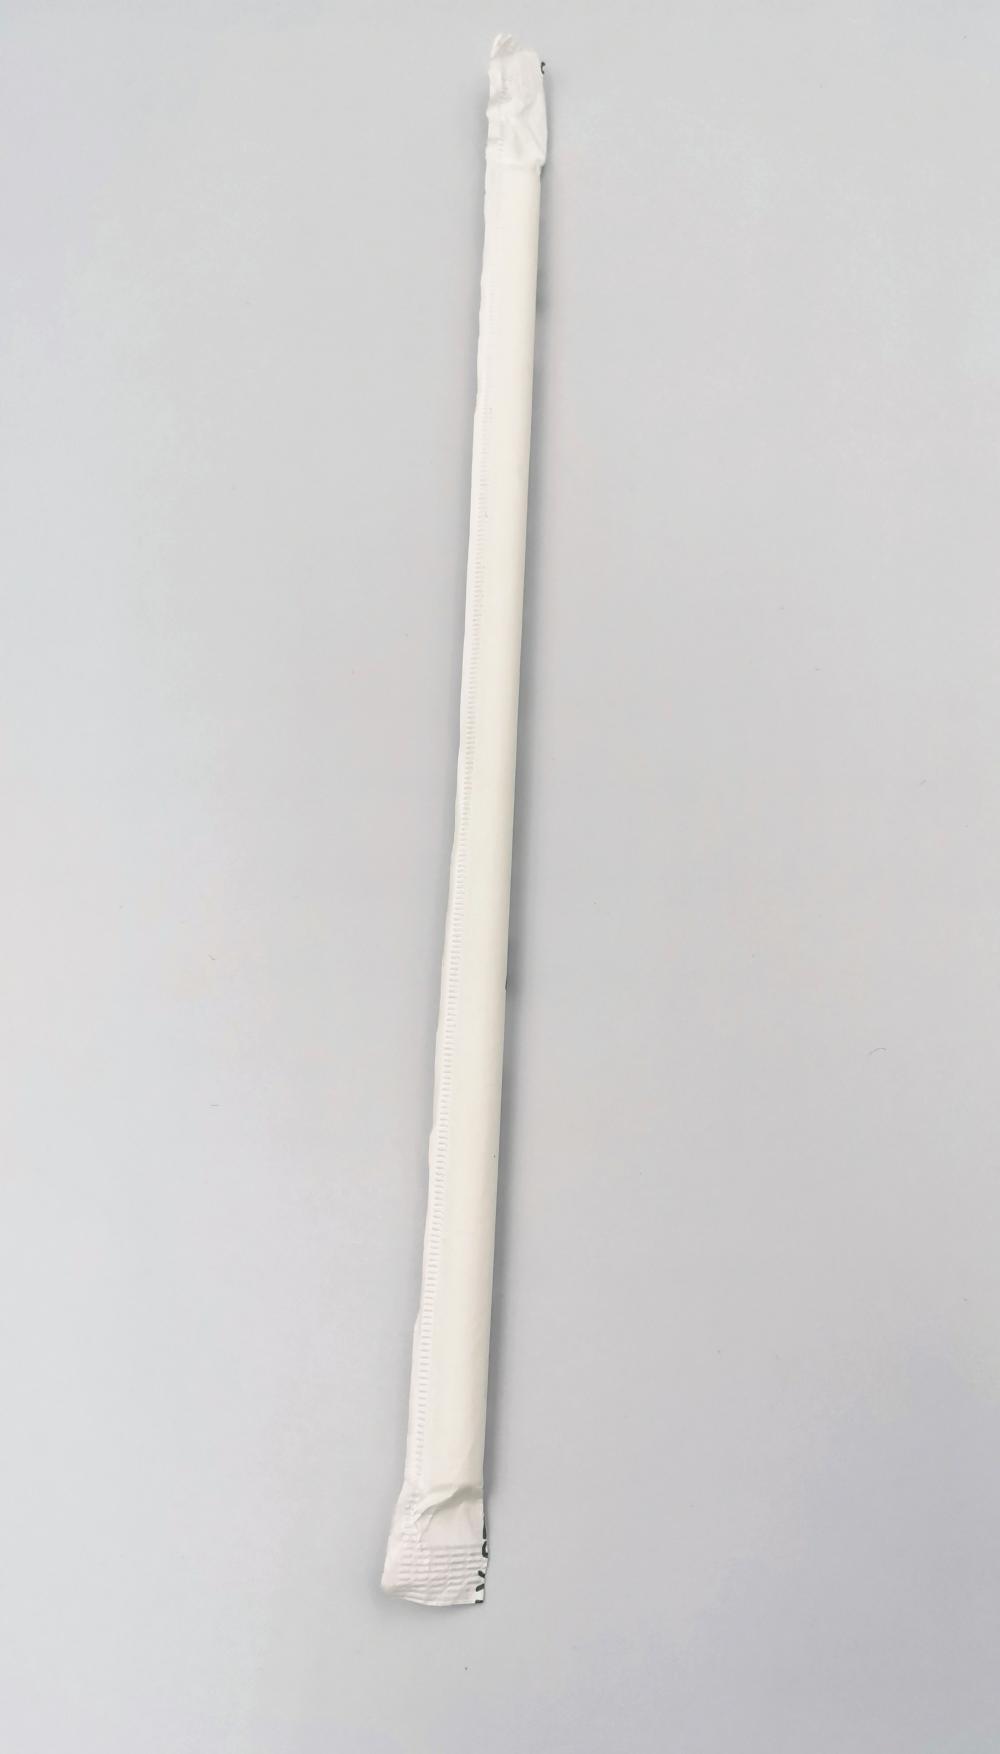 100% Biodegradable Stright Drinking Straw